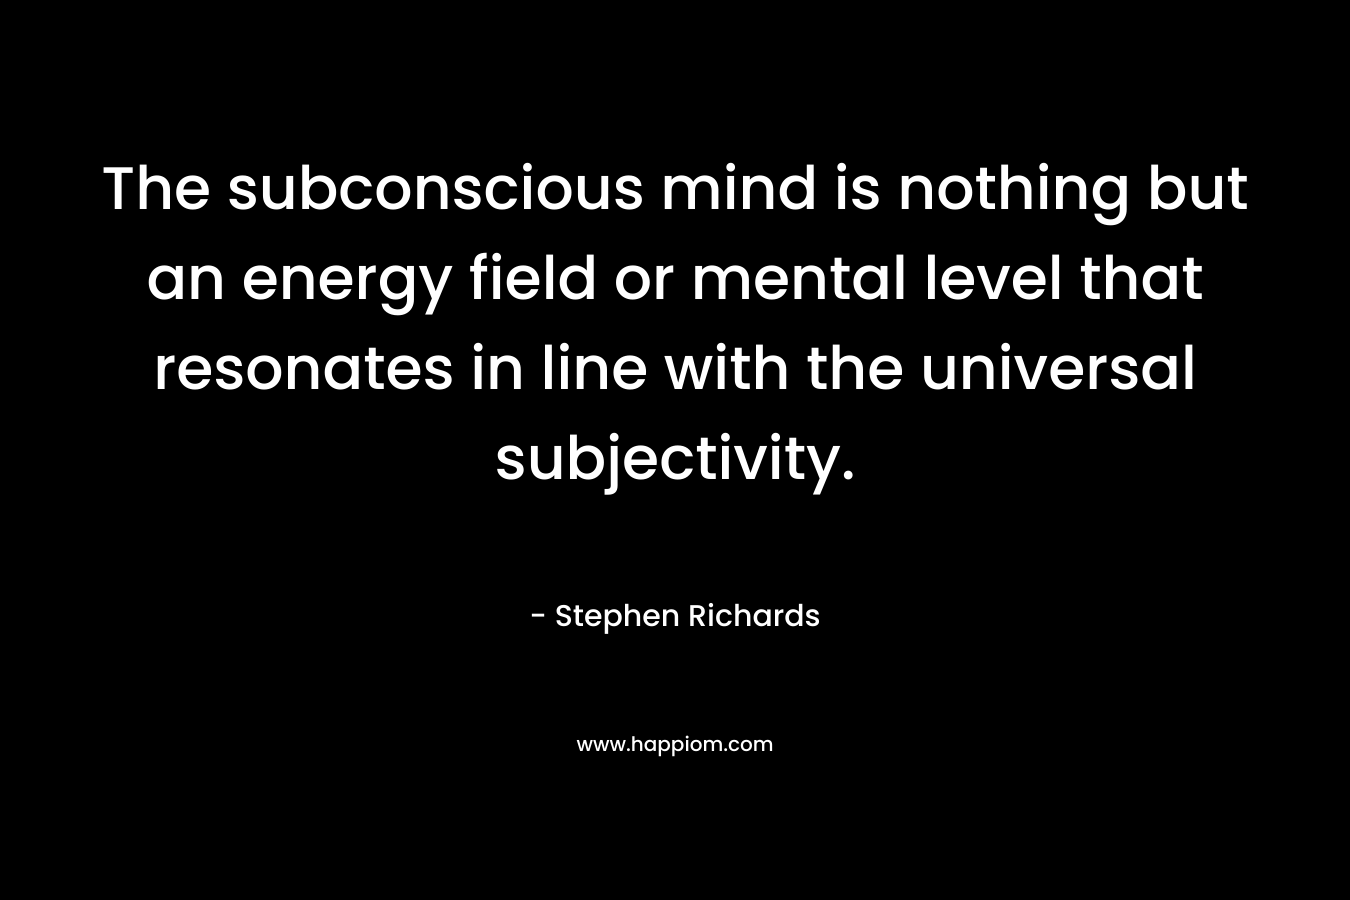 The subconscious mind is nothing but an energy field or mental level that resonates in line with the universal subjectivity.